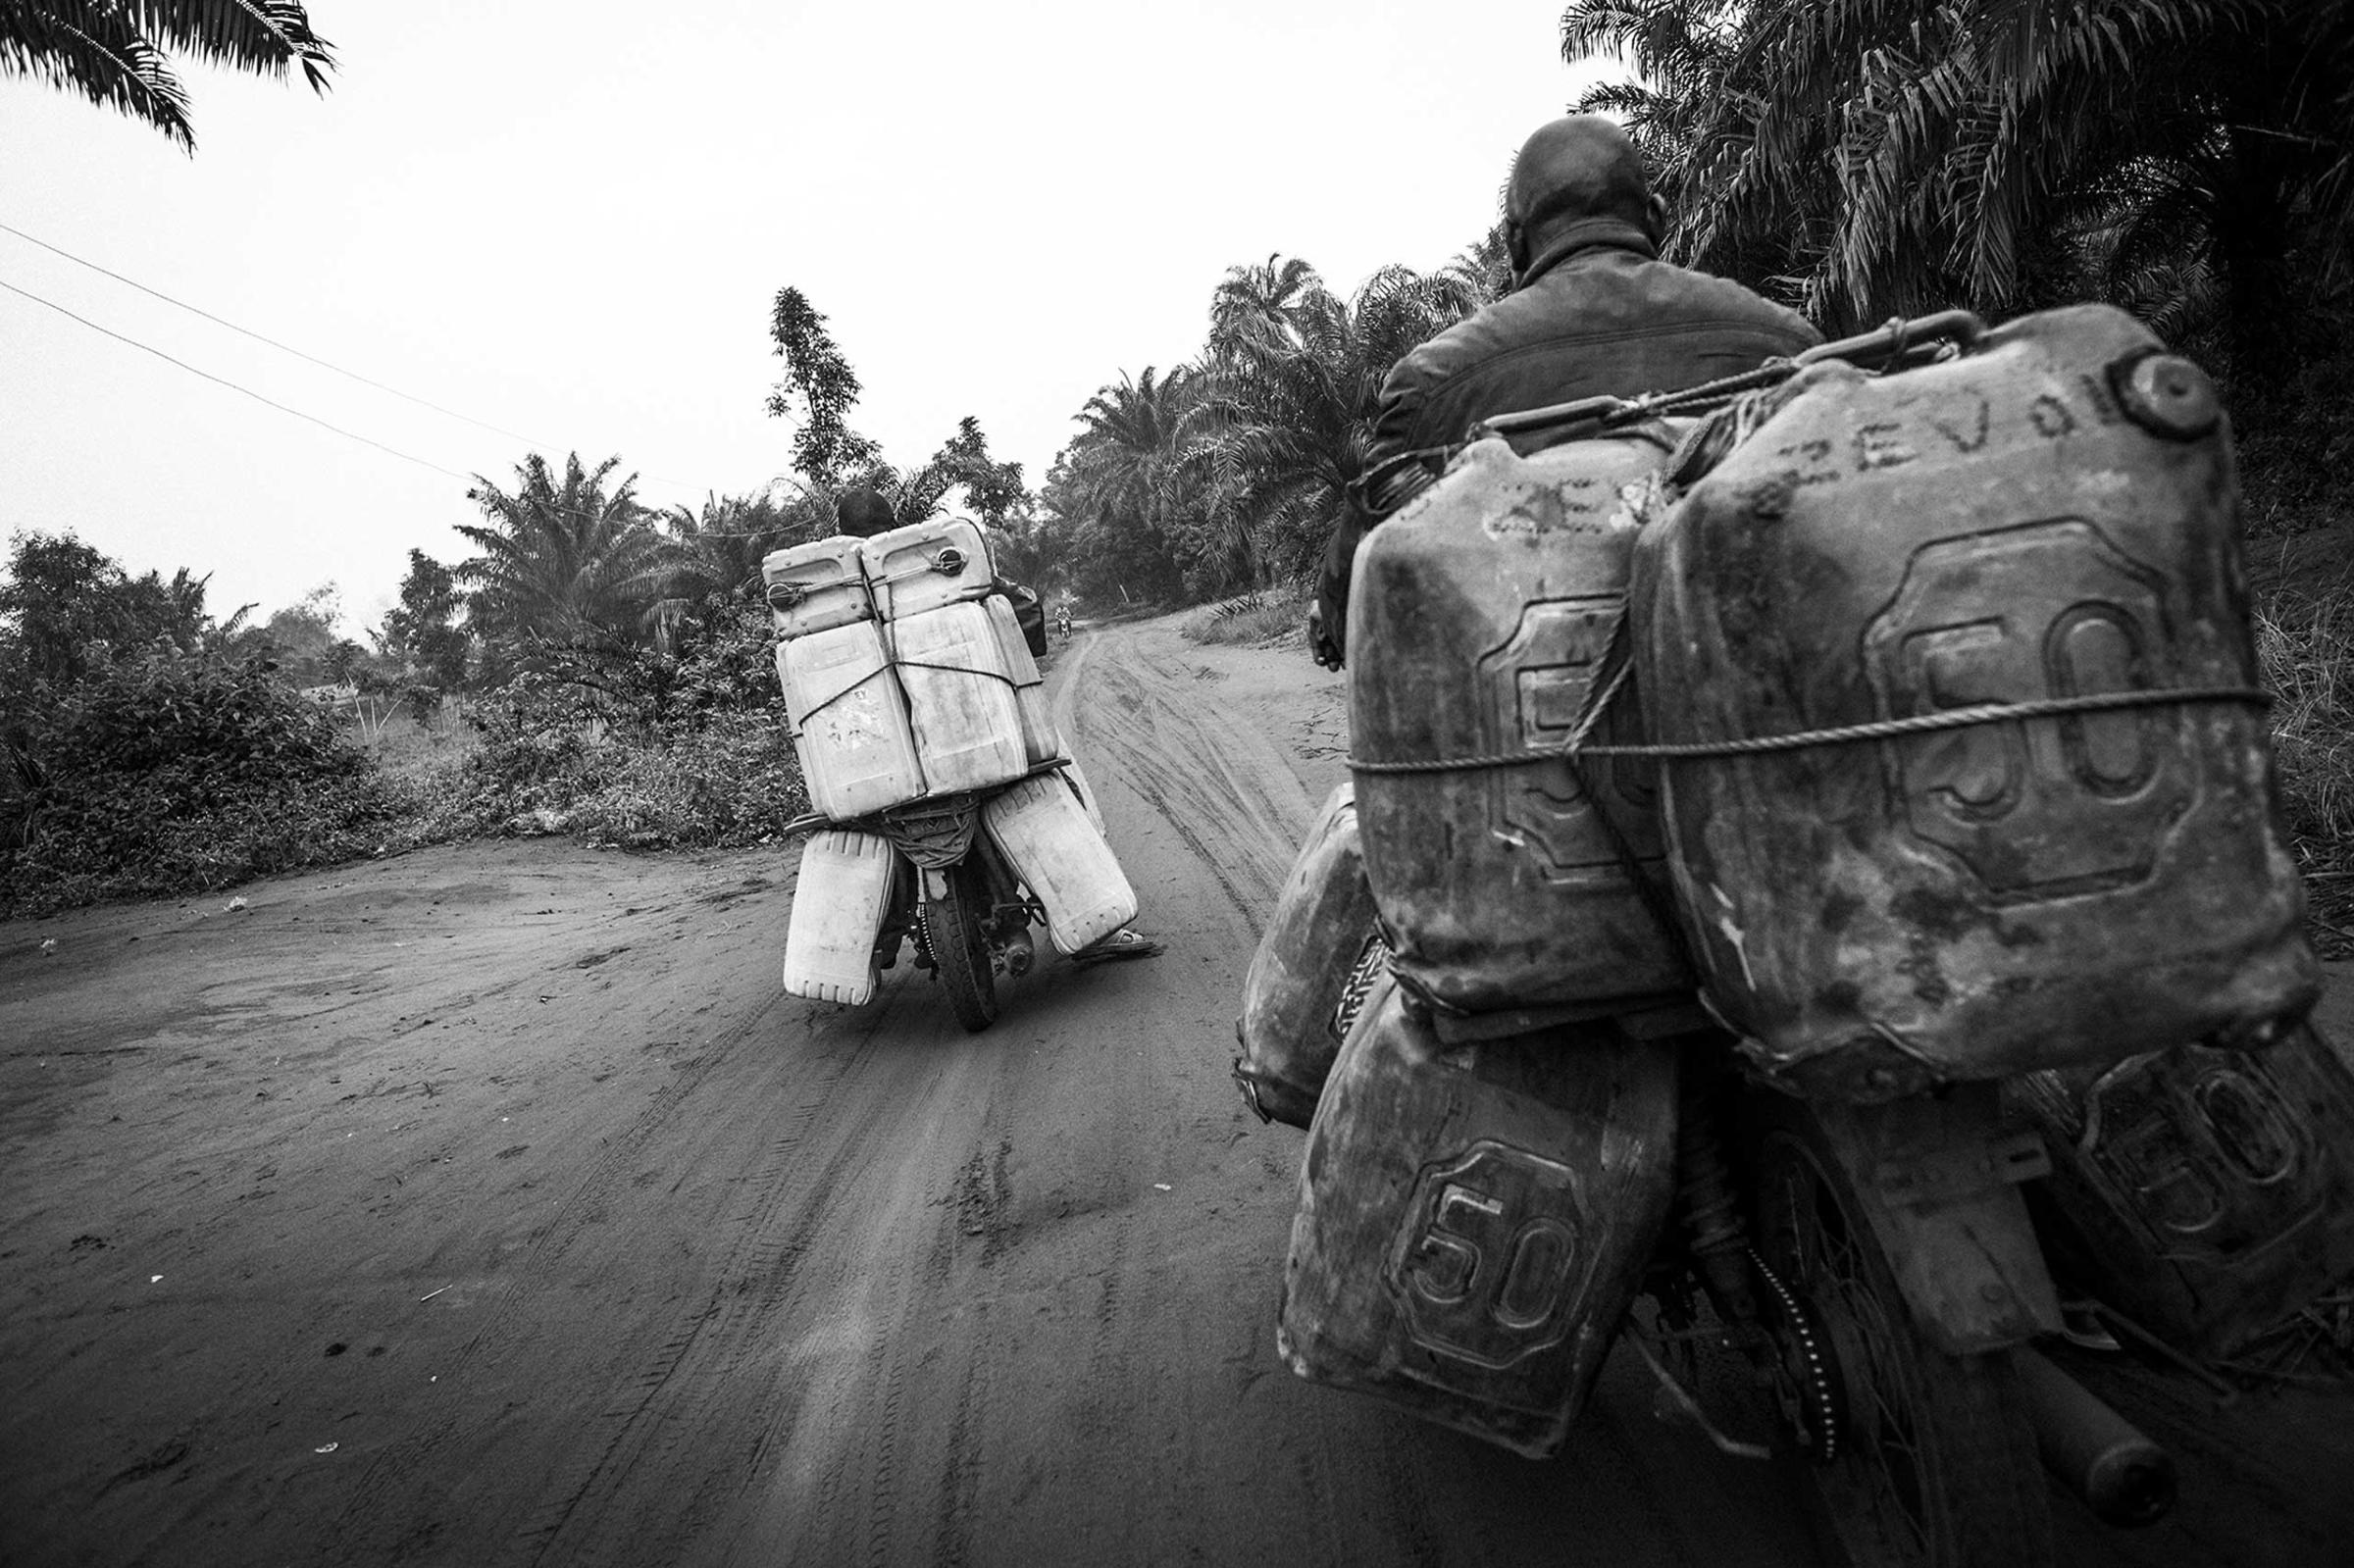 The mission of the suicide bombers is to drive the vehicles on sinuous paths in the jungle to the paved roads which communicate with the core of the population.